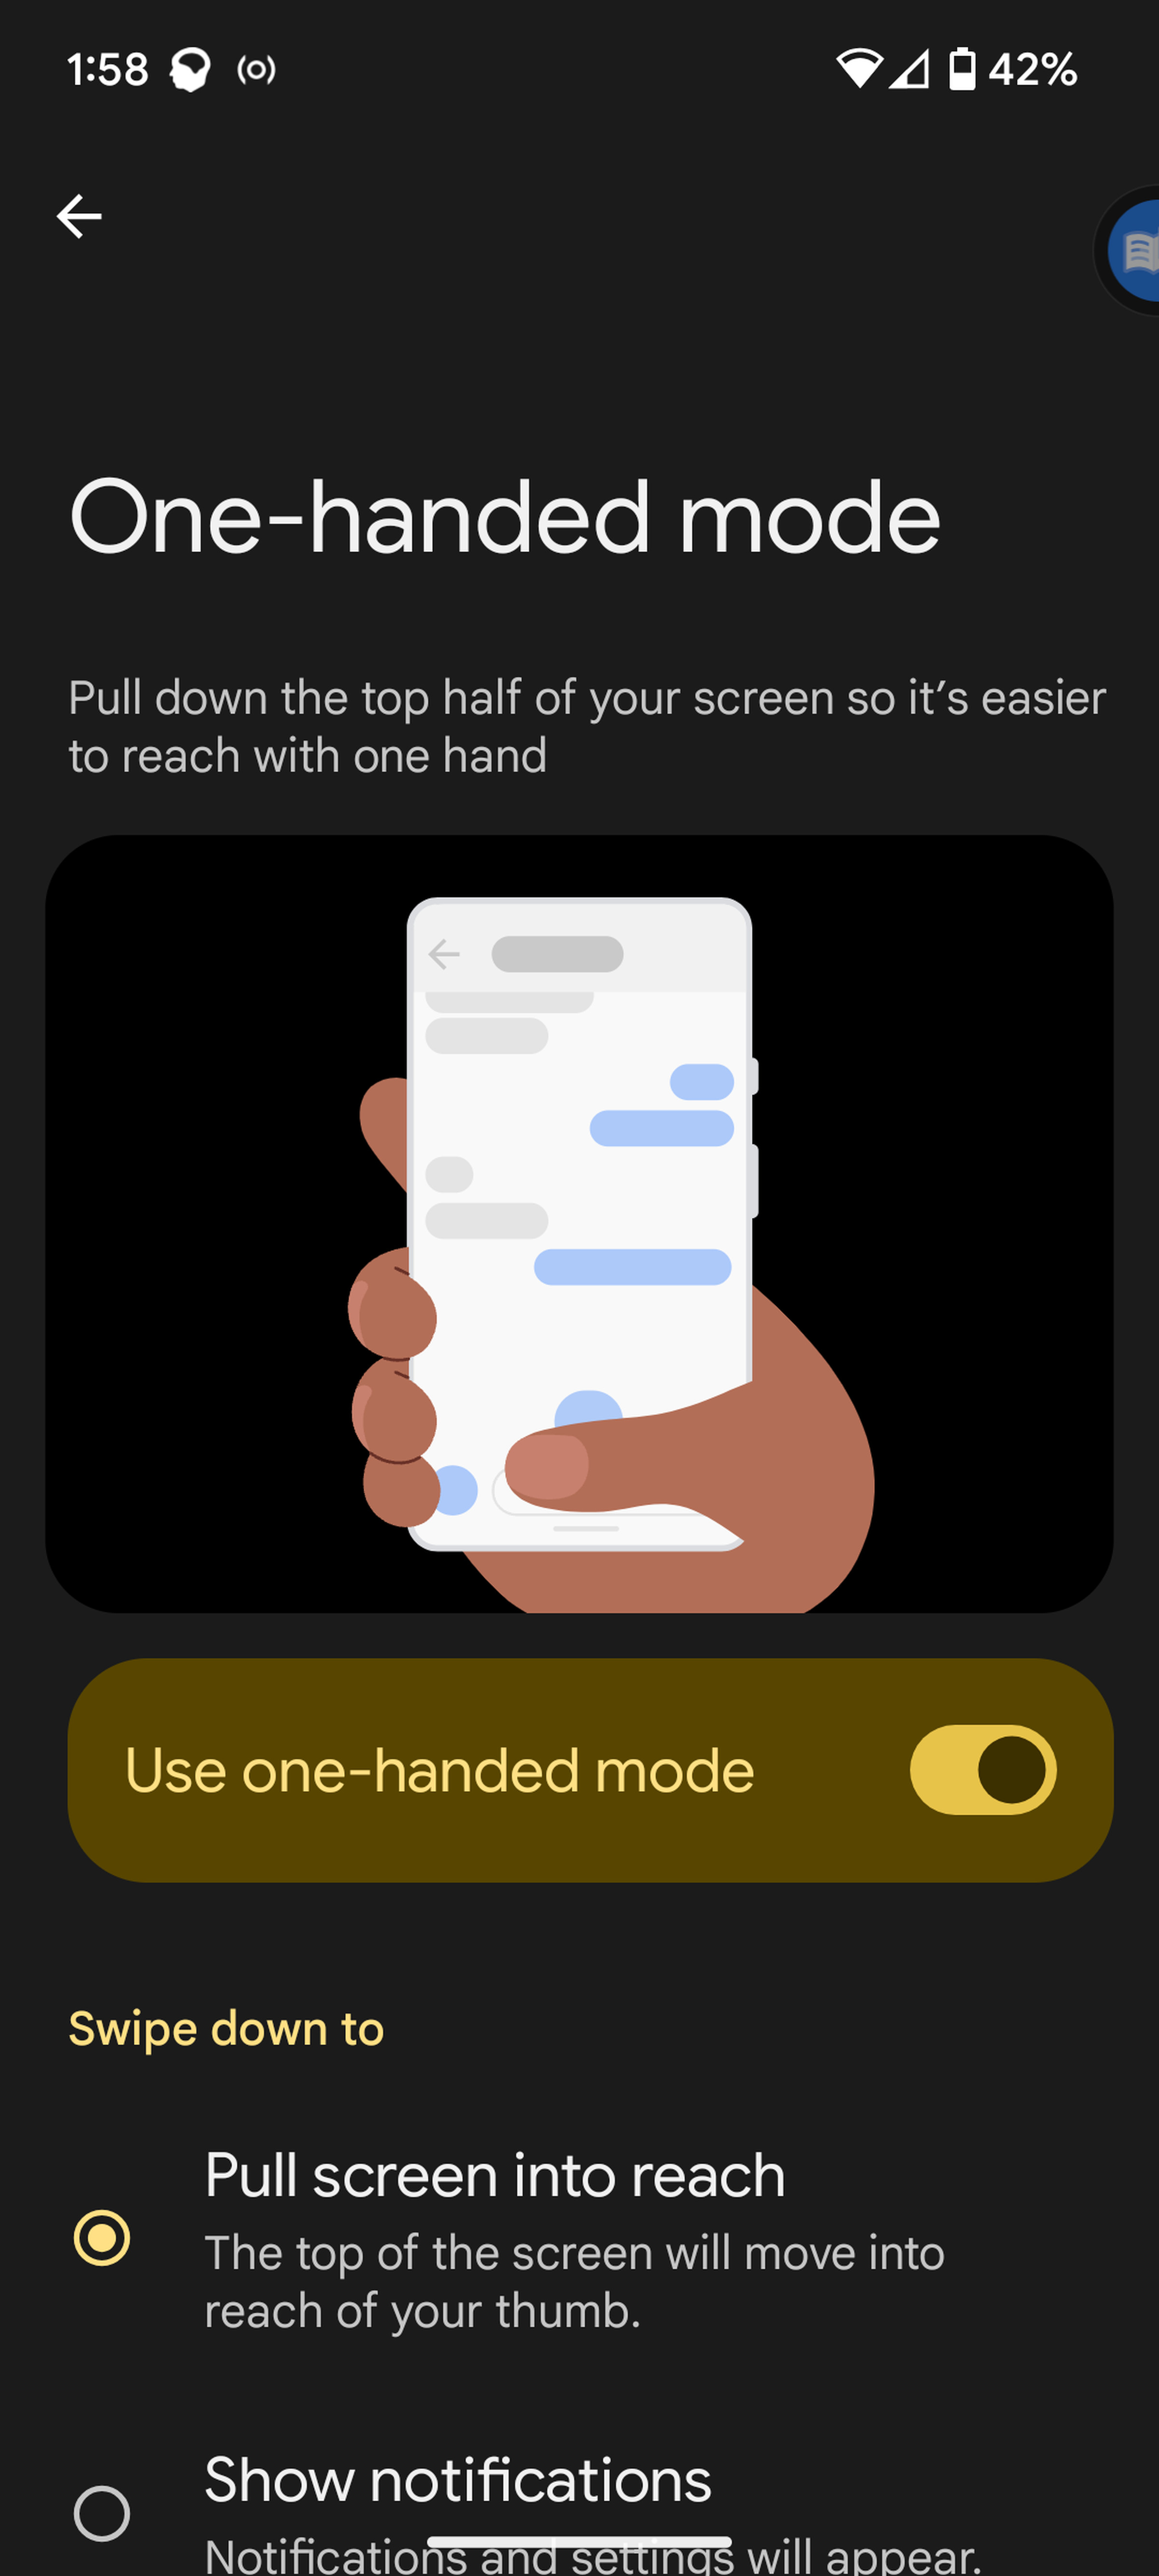 Mobile screen headed “one-handed mode” with illustrated hand holding phone and “Use one-handed mode” toggled on below.